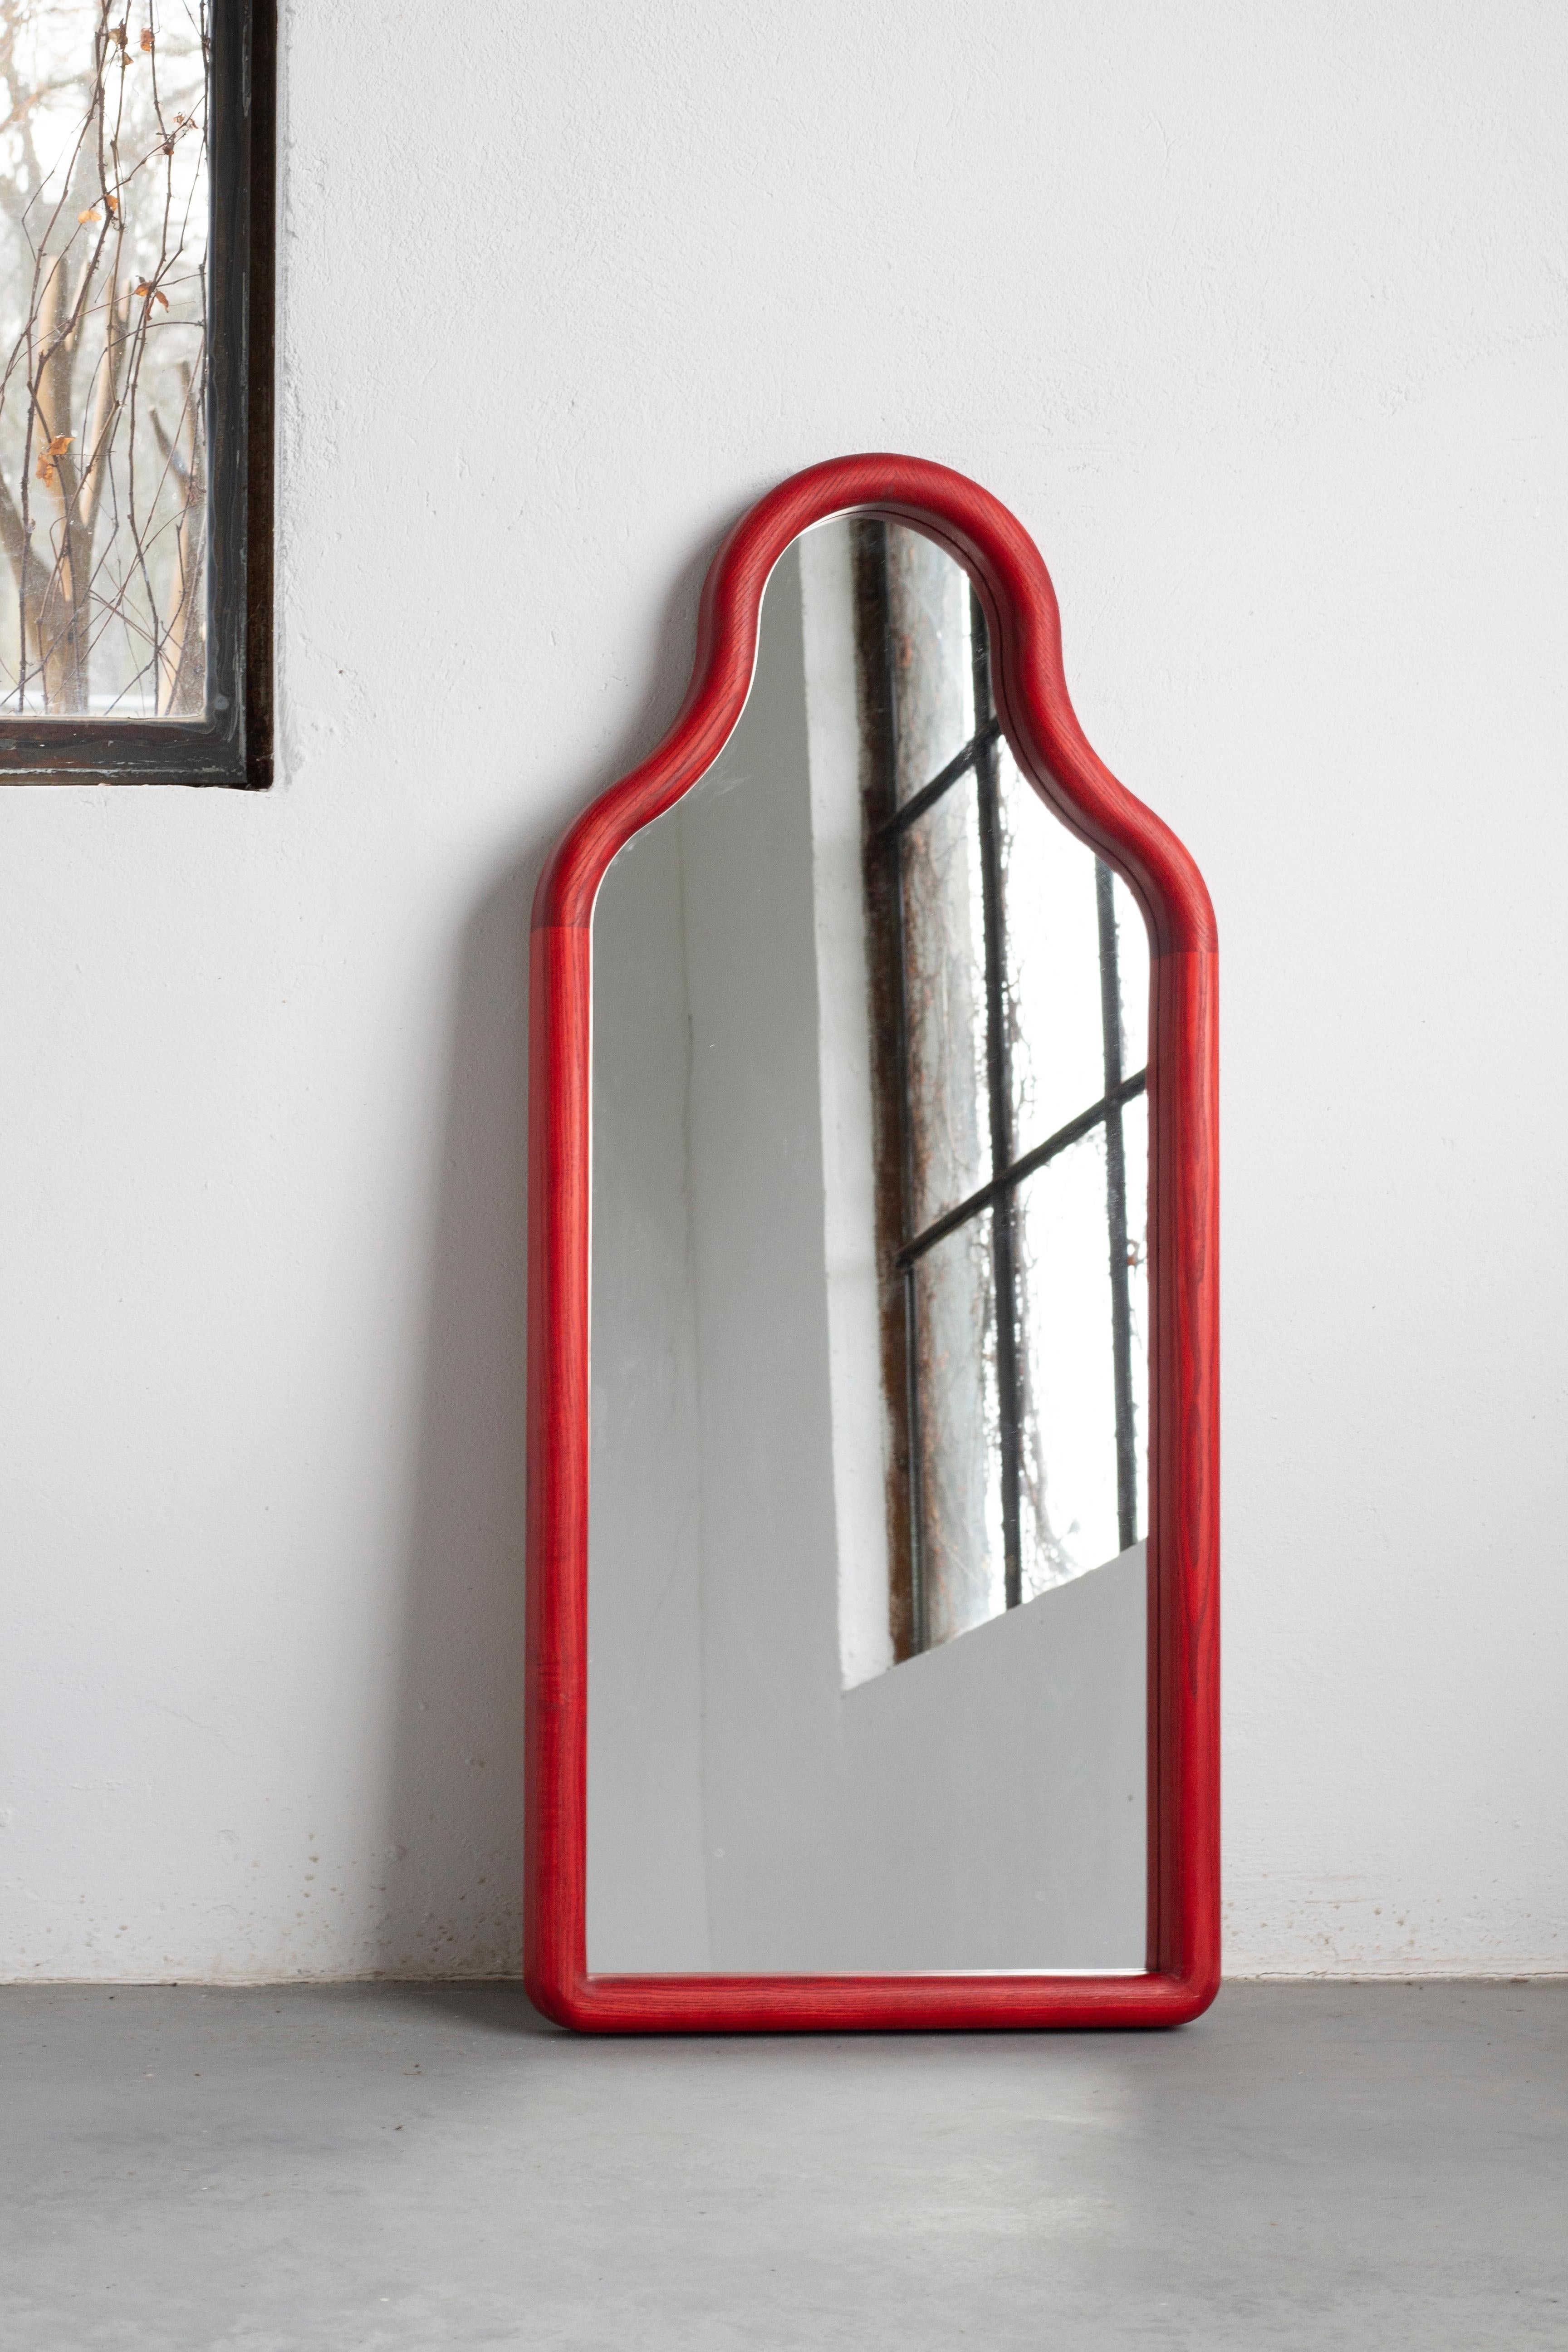 TRN S Floor mirror
Signed by Pani Jurek

Dimensions: H100 x 41,5 x 5
Materials: Solid ash wood, hand stained
Colors: red, blue, green, natural

_________________________________

Pani Jurek is a Polish design studio founded by artist and designer